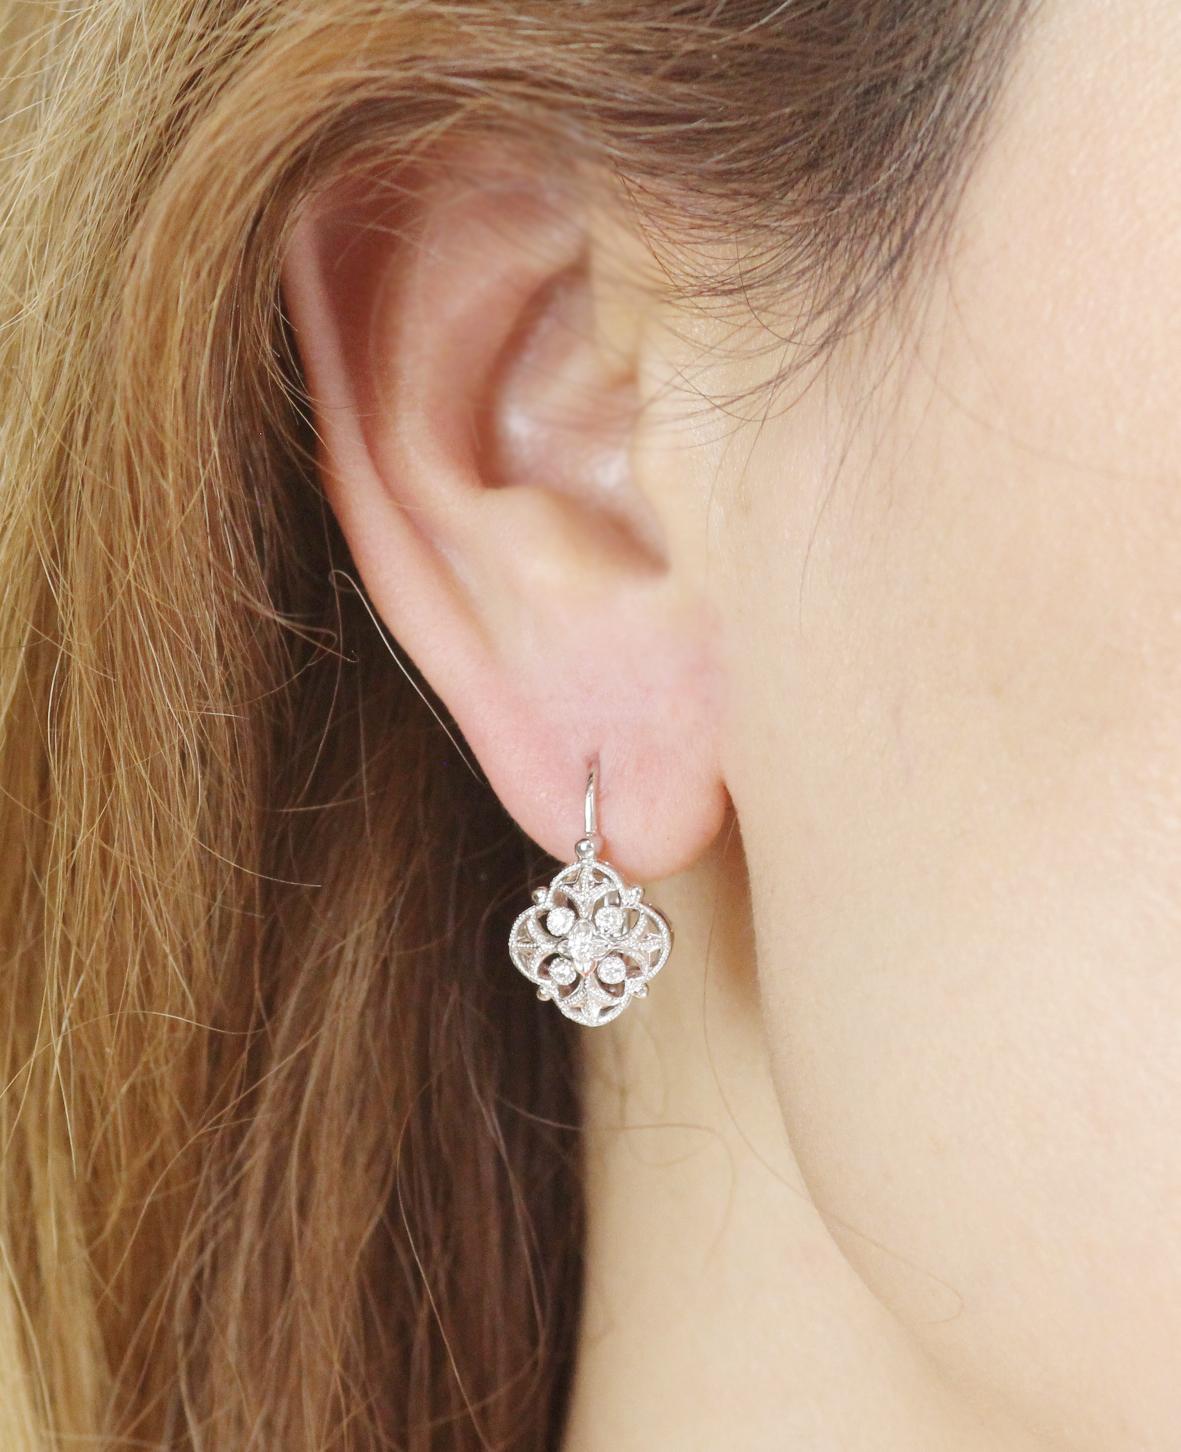 Featuring a decorative quatrefoil frame set with glittering round brilliant diamonds, these earrings are perfect for the office and then into cocktail hour!

With a total diamond weight of 0.16ct, these pretty, shimmery earrings will be a fashion